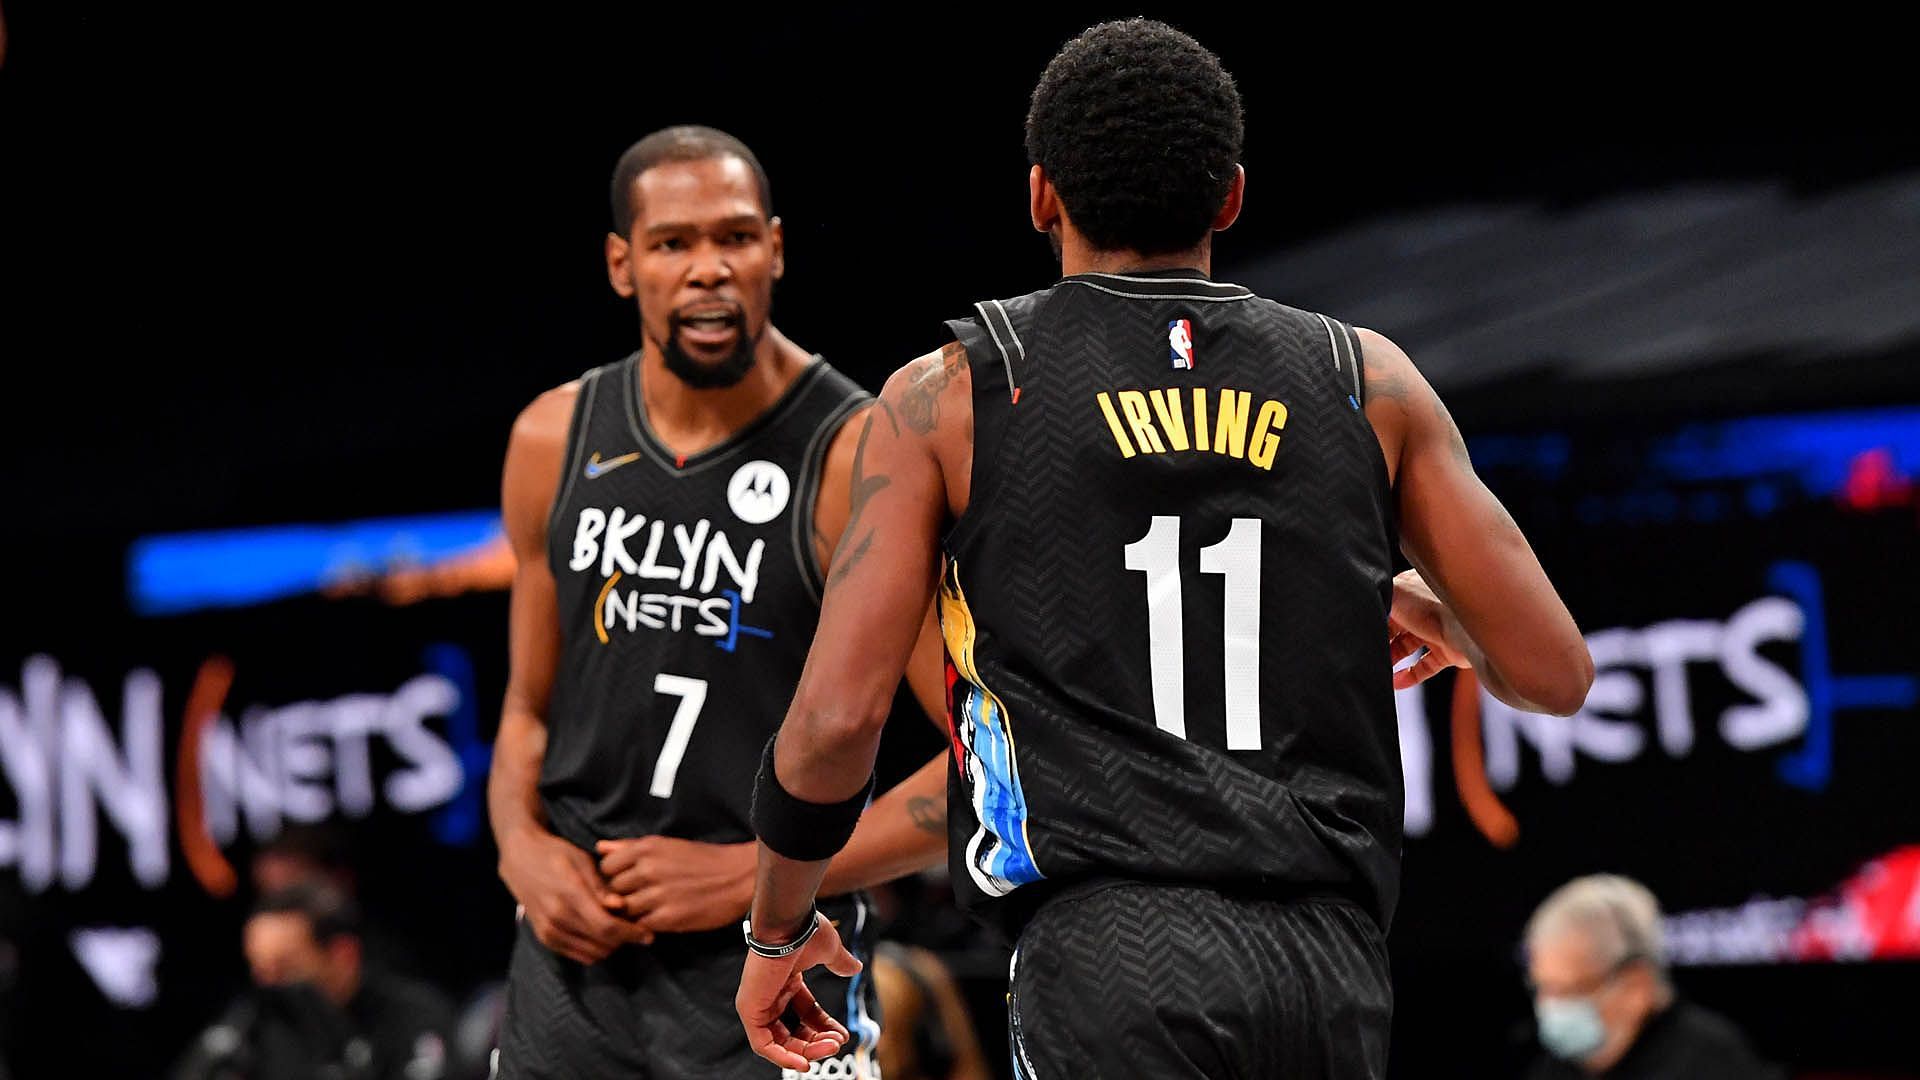 Kyrie Irving is refusing to budge on his vaccination stance after Kevin Durant went down with an injury. [Photo: NBA.com]